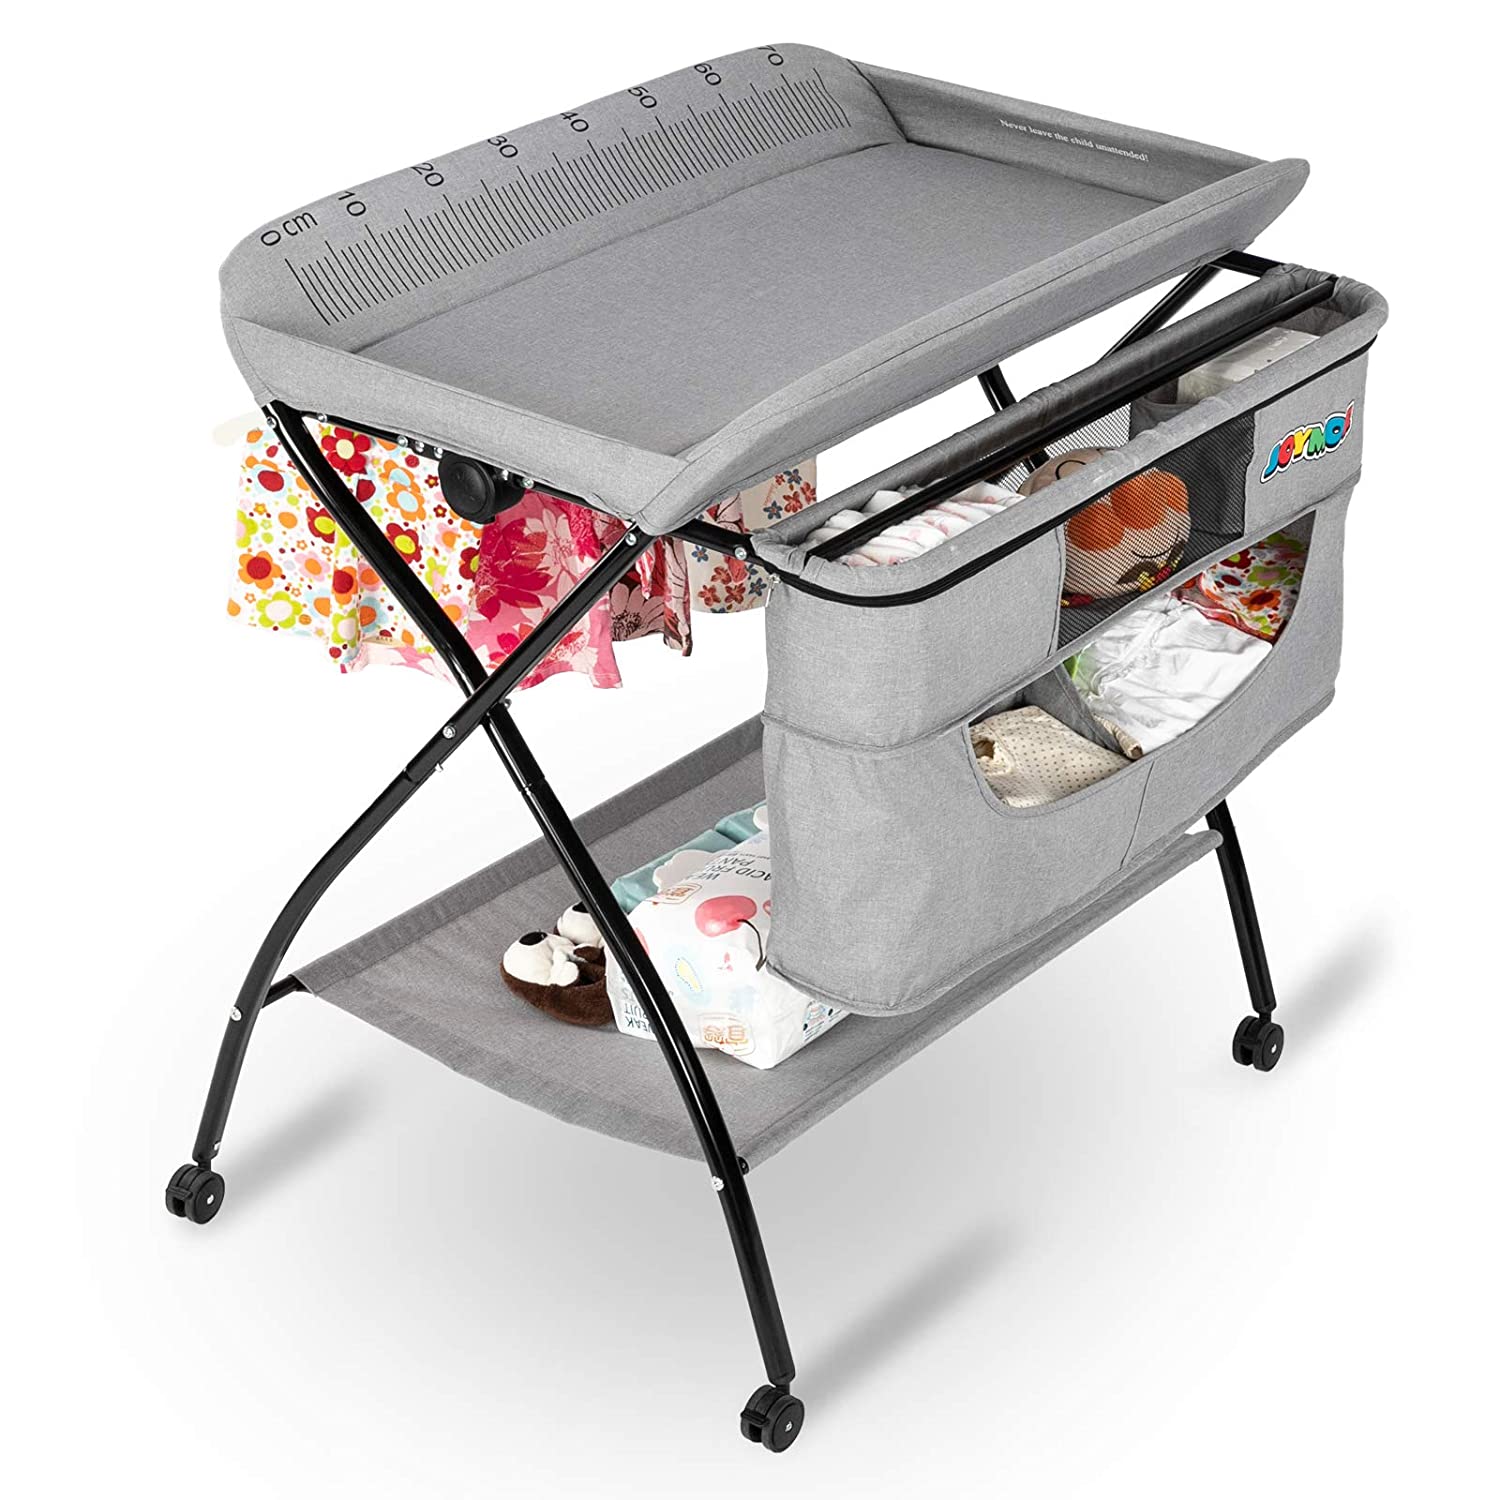 Babyjoy Baby Changing Table with Bathtub, Folding & Portable Diaper Station  with Wheels White